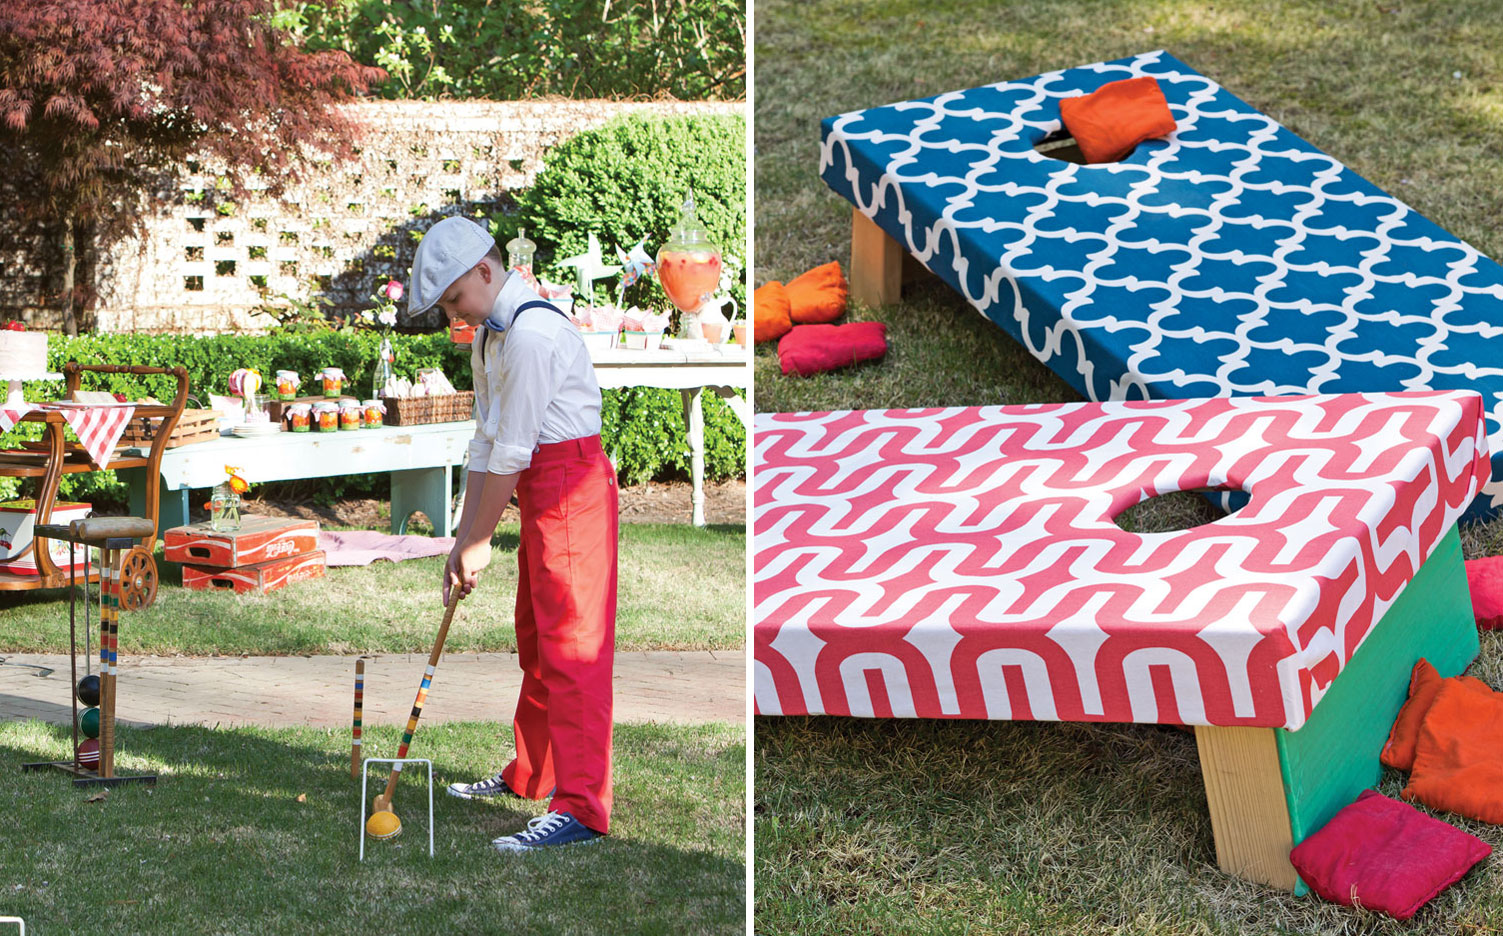 A photo of a child playing crochet and cornhole boards